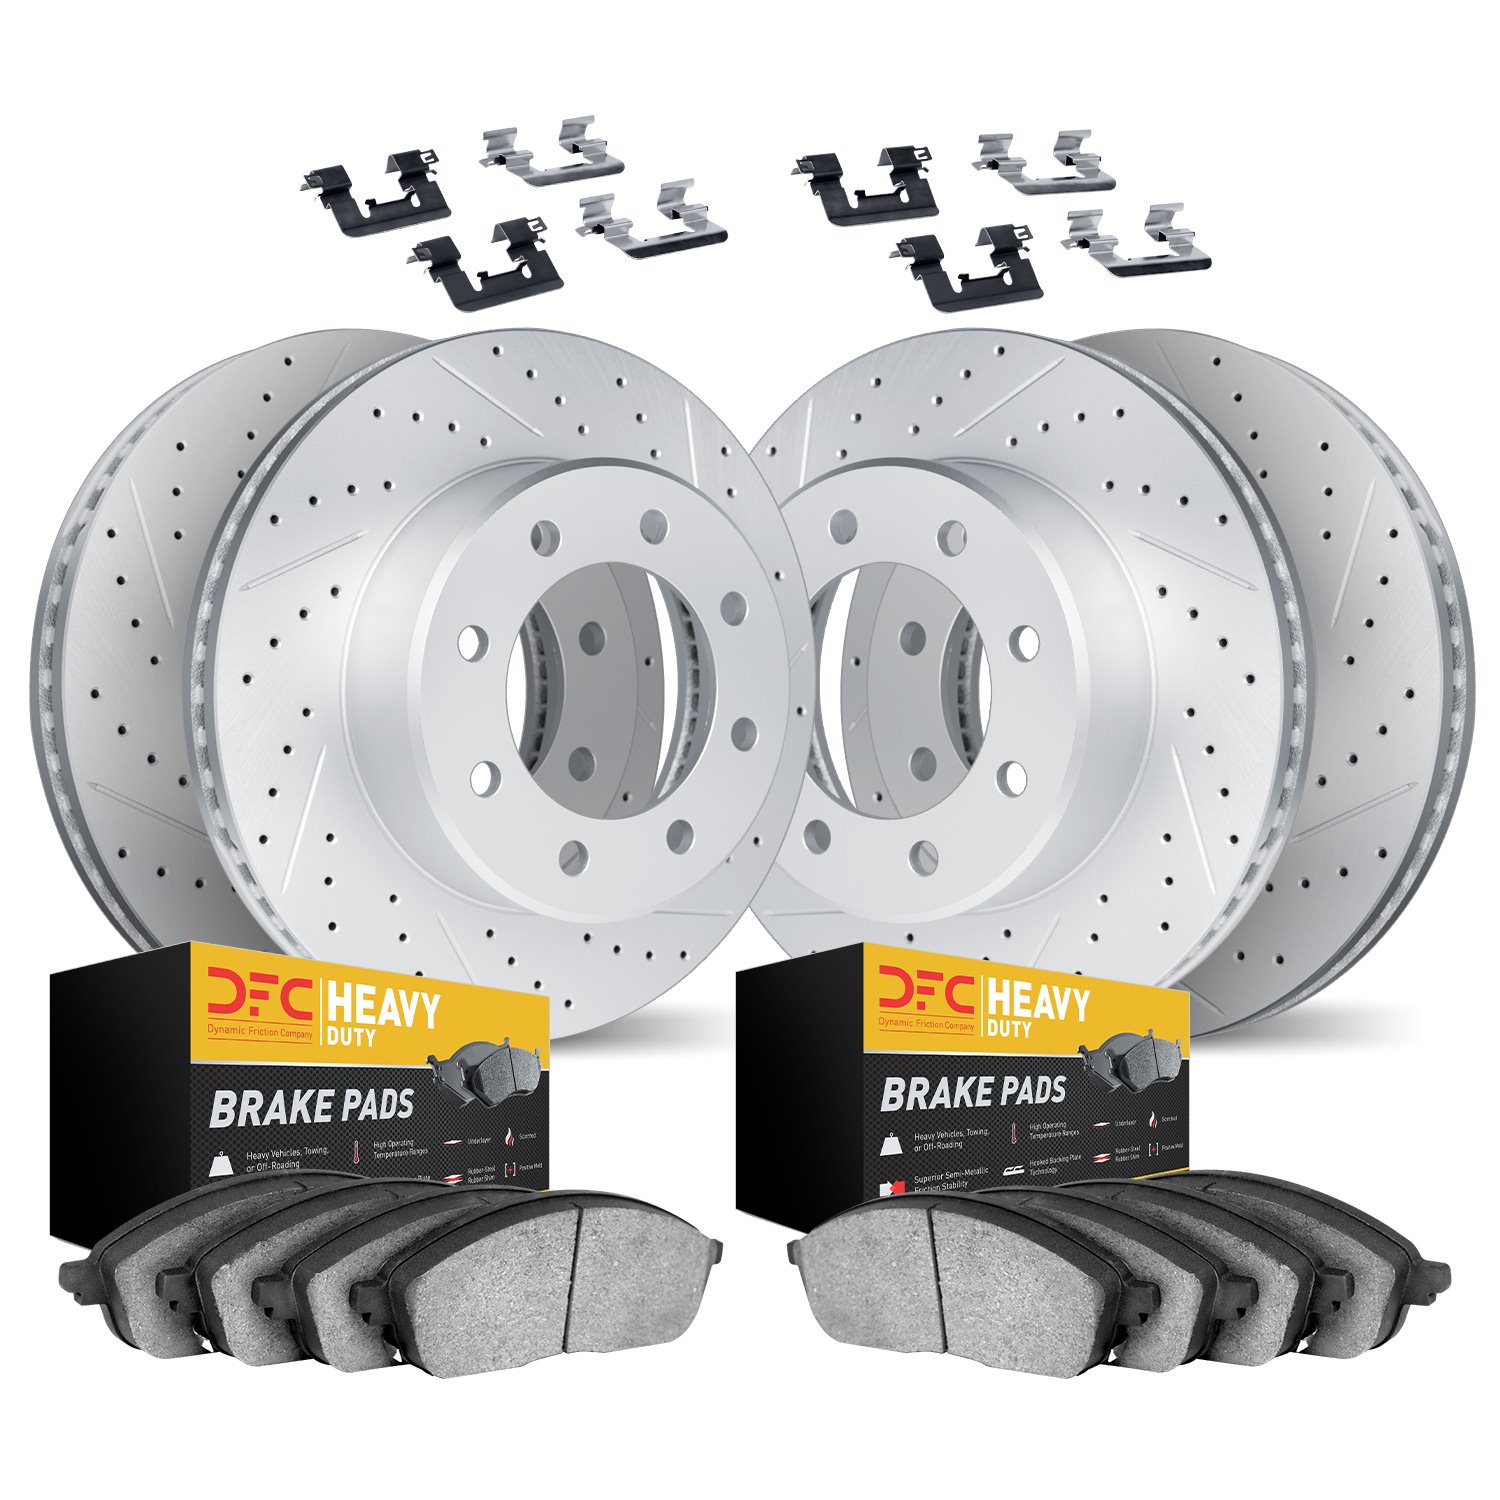 2214-99078 Geoperformance Drilled/Slotted Rotors w/Heavy-Duty Pads Kit & Hardware, 2010-2012 Ford/Lincoln/Mercury/Mazda, Positio